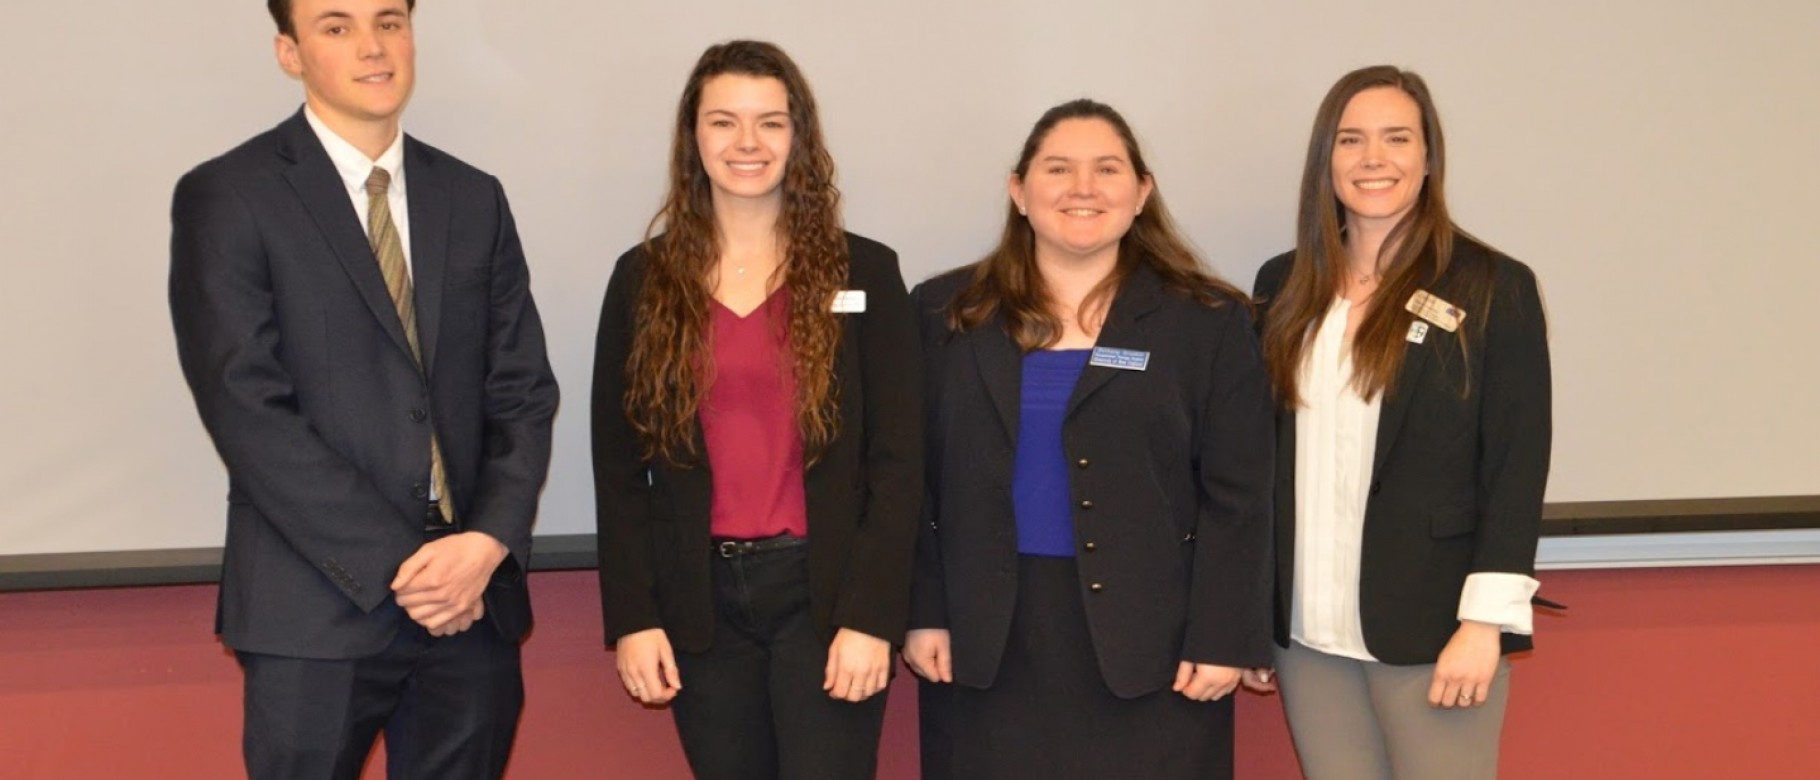 The team comprised of students Adrian Hale, Sarah Barbay, Bethany Gruskin, and Dahne Yaitanes captured first place